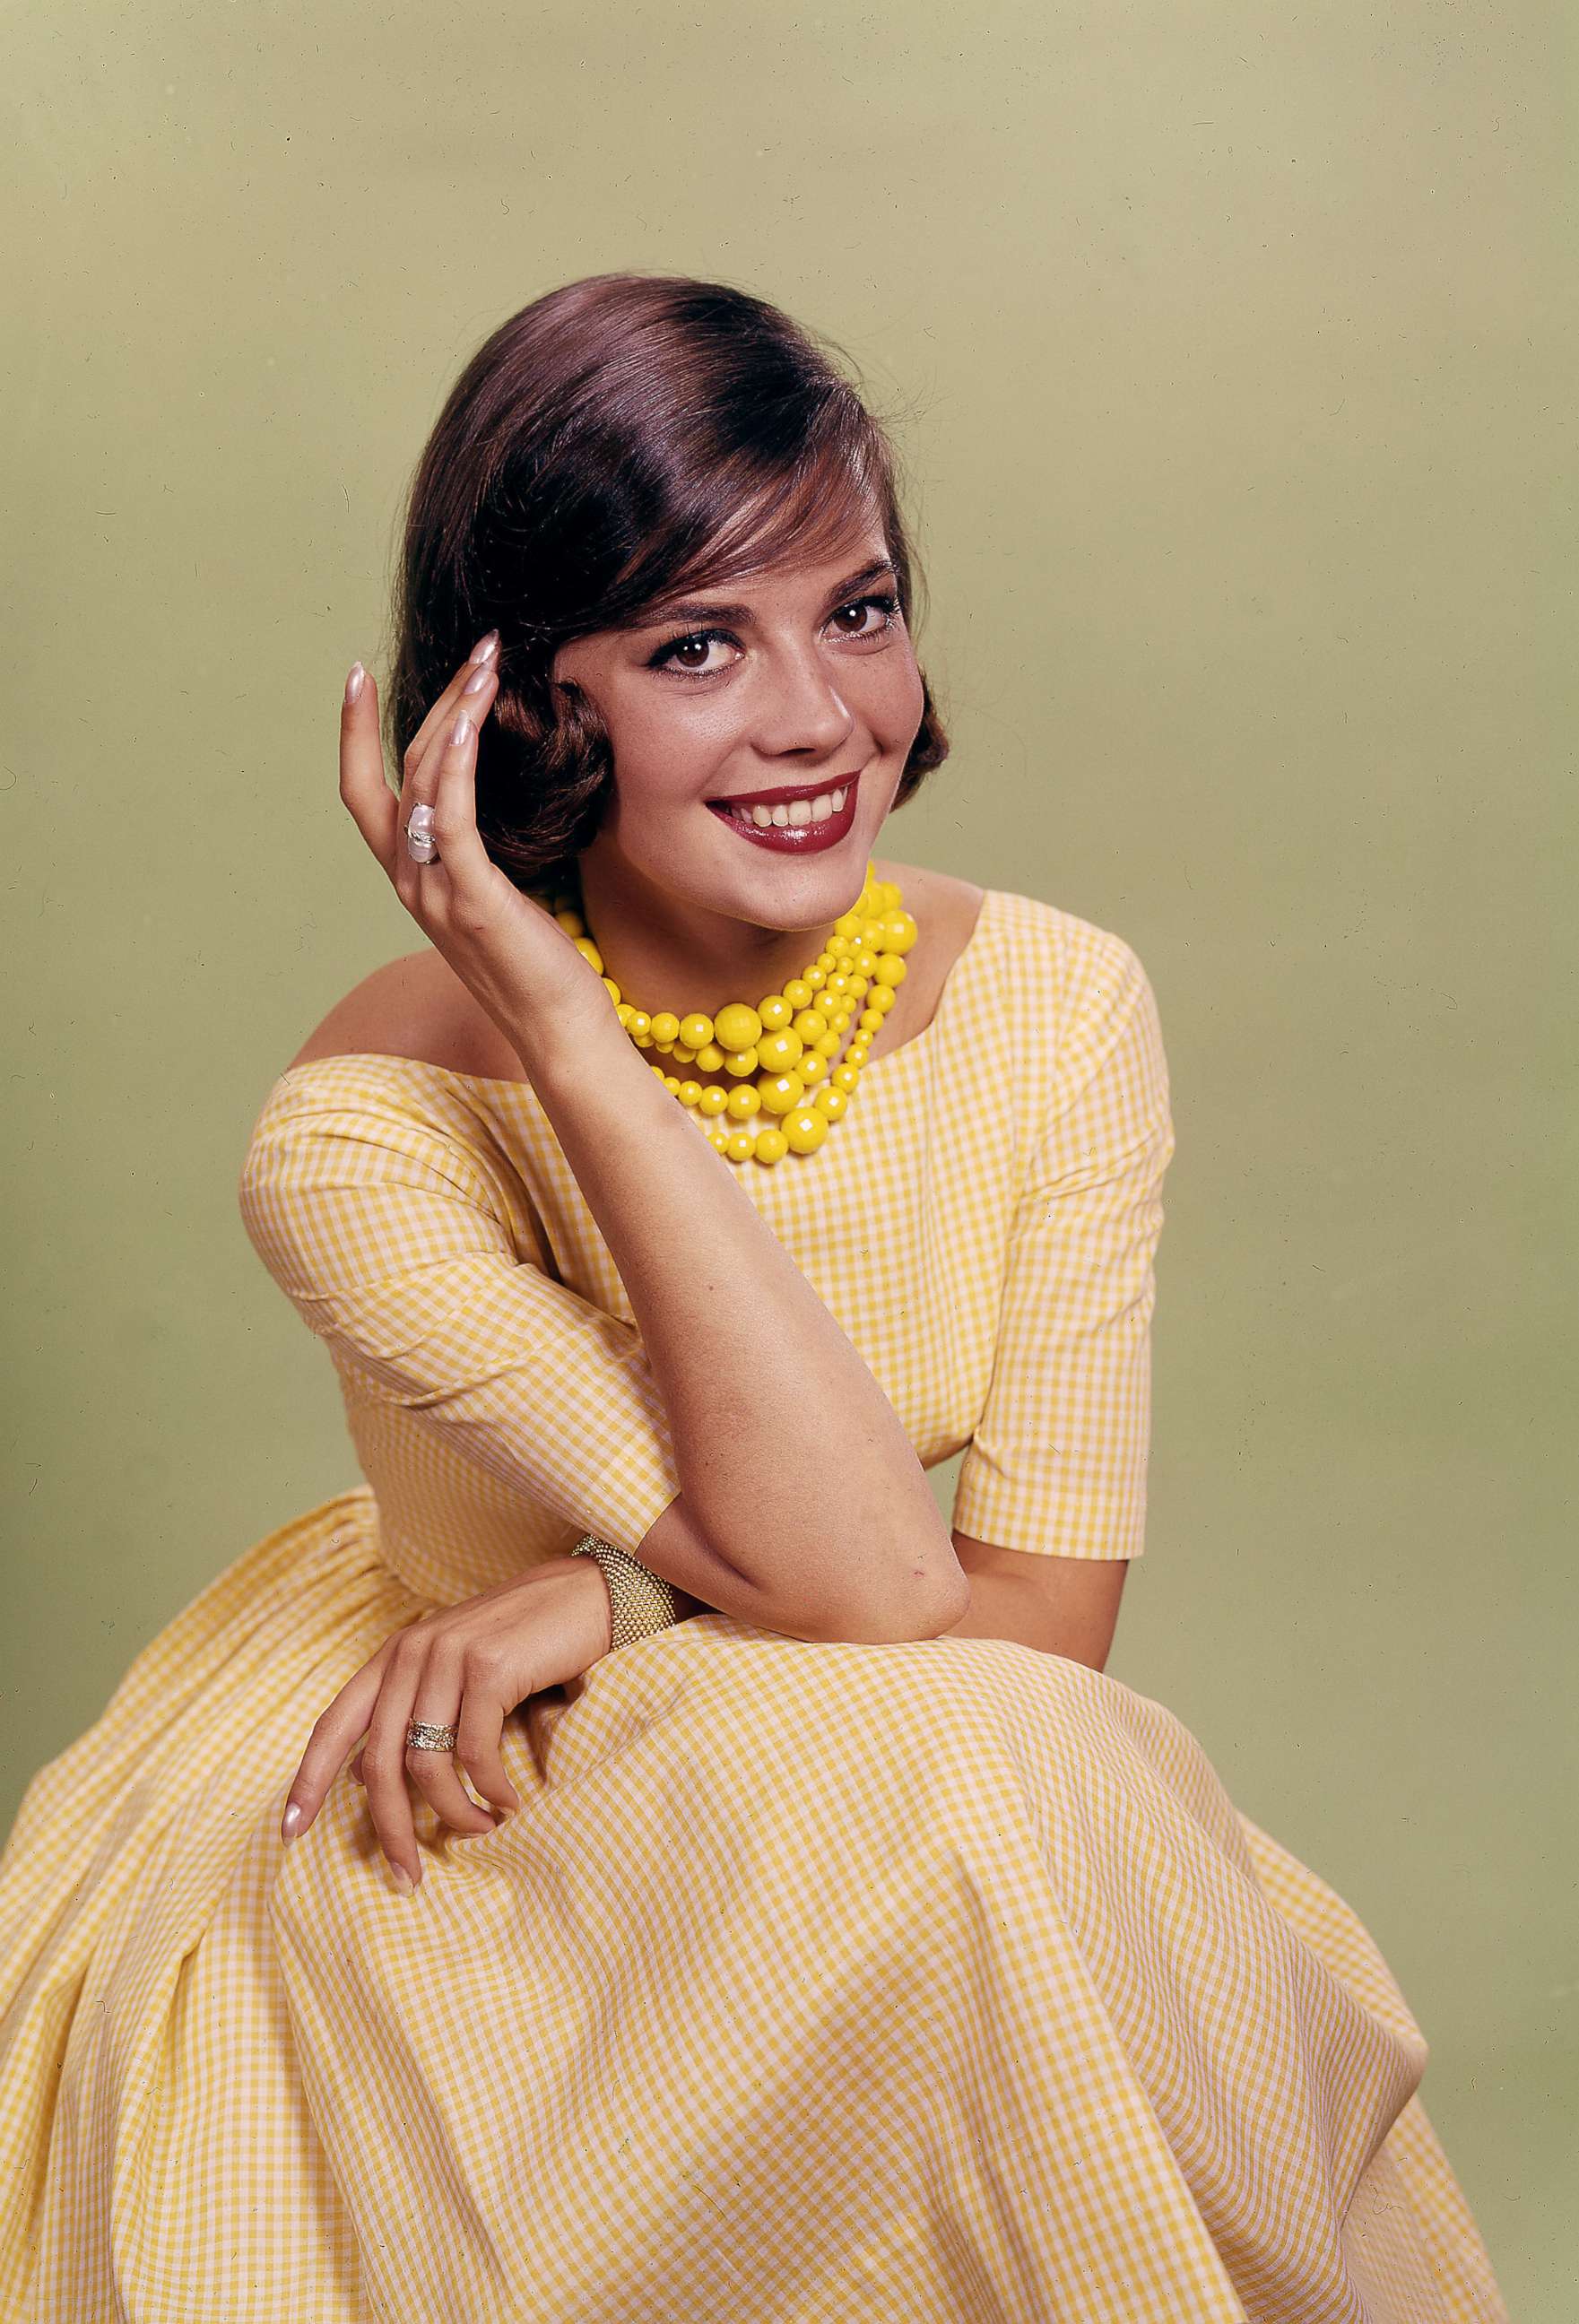 PHOTO: Natalie Wood in the Daily News color studio, Aug. 21, 1956.